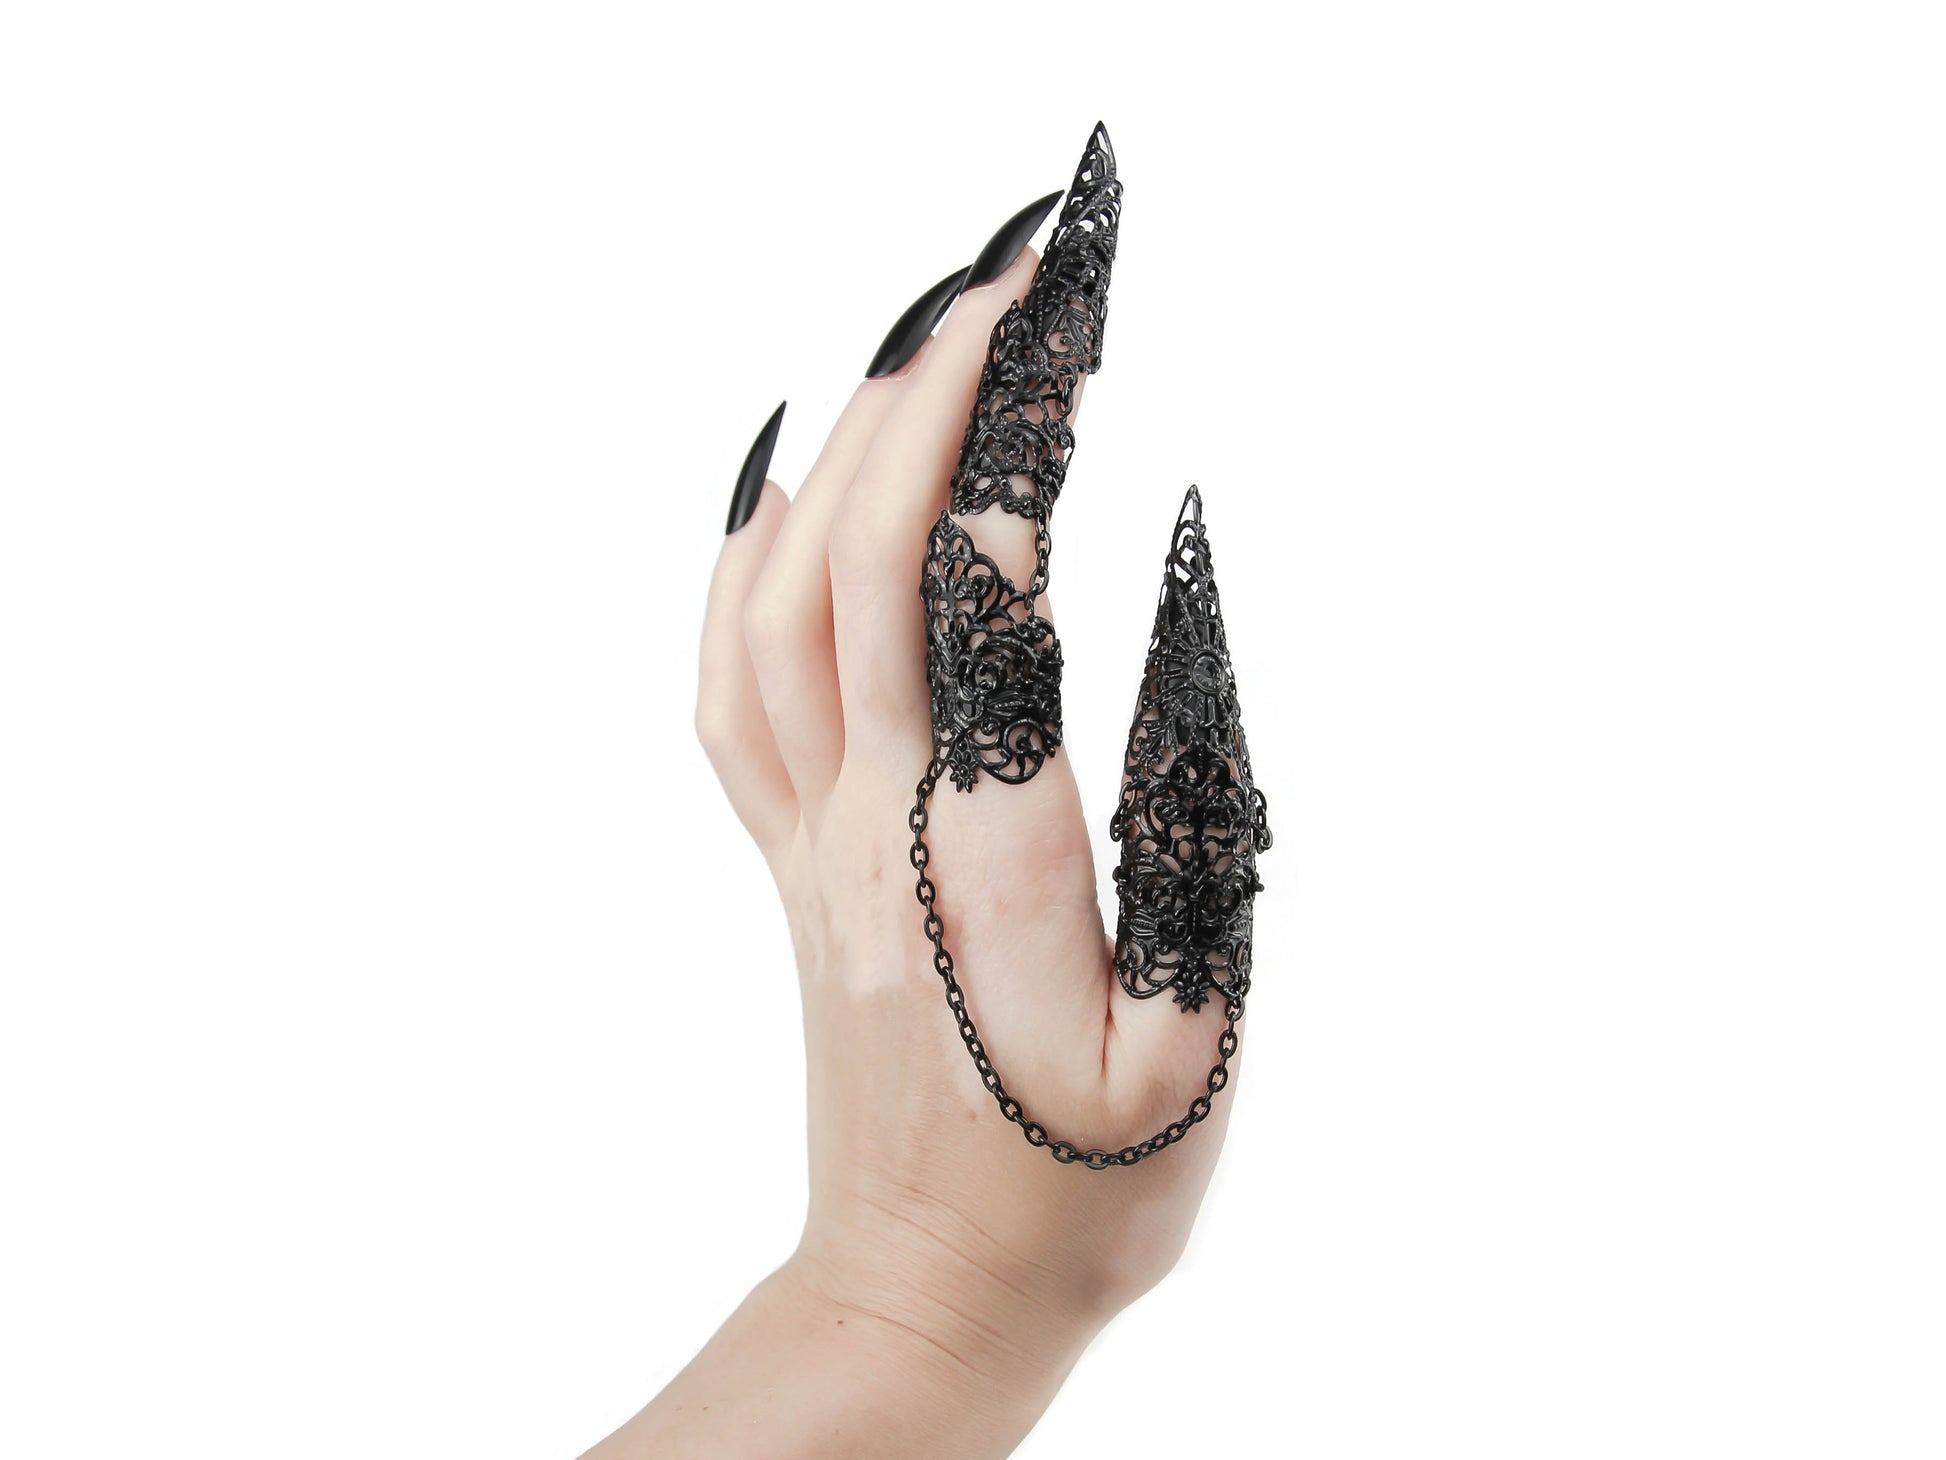 A hand adorned with Myril Jewels' distinctive gothic full finger double rings, featuring elaborate claw-like extensions that cover the fingertips. The rings, connected by a fine chain, showcase intricate black filigree work, reflecting a dark, avant-garde aesthetic. This bold accessory is a statement piece for gothic, punk, and neo-gothic jewelry collectors, ideal for Halloween, witchcore fashion, or as an eye-catching element for everyday wear and festival outfits.